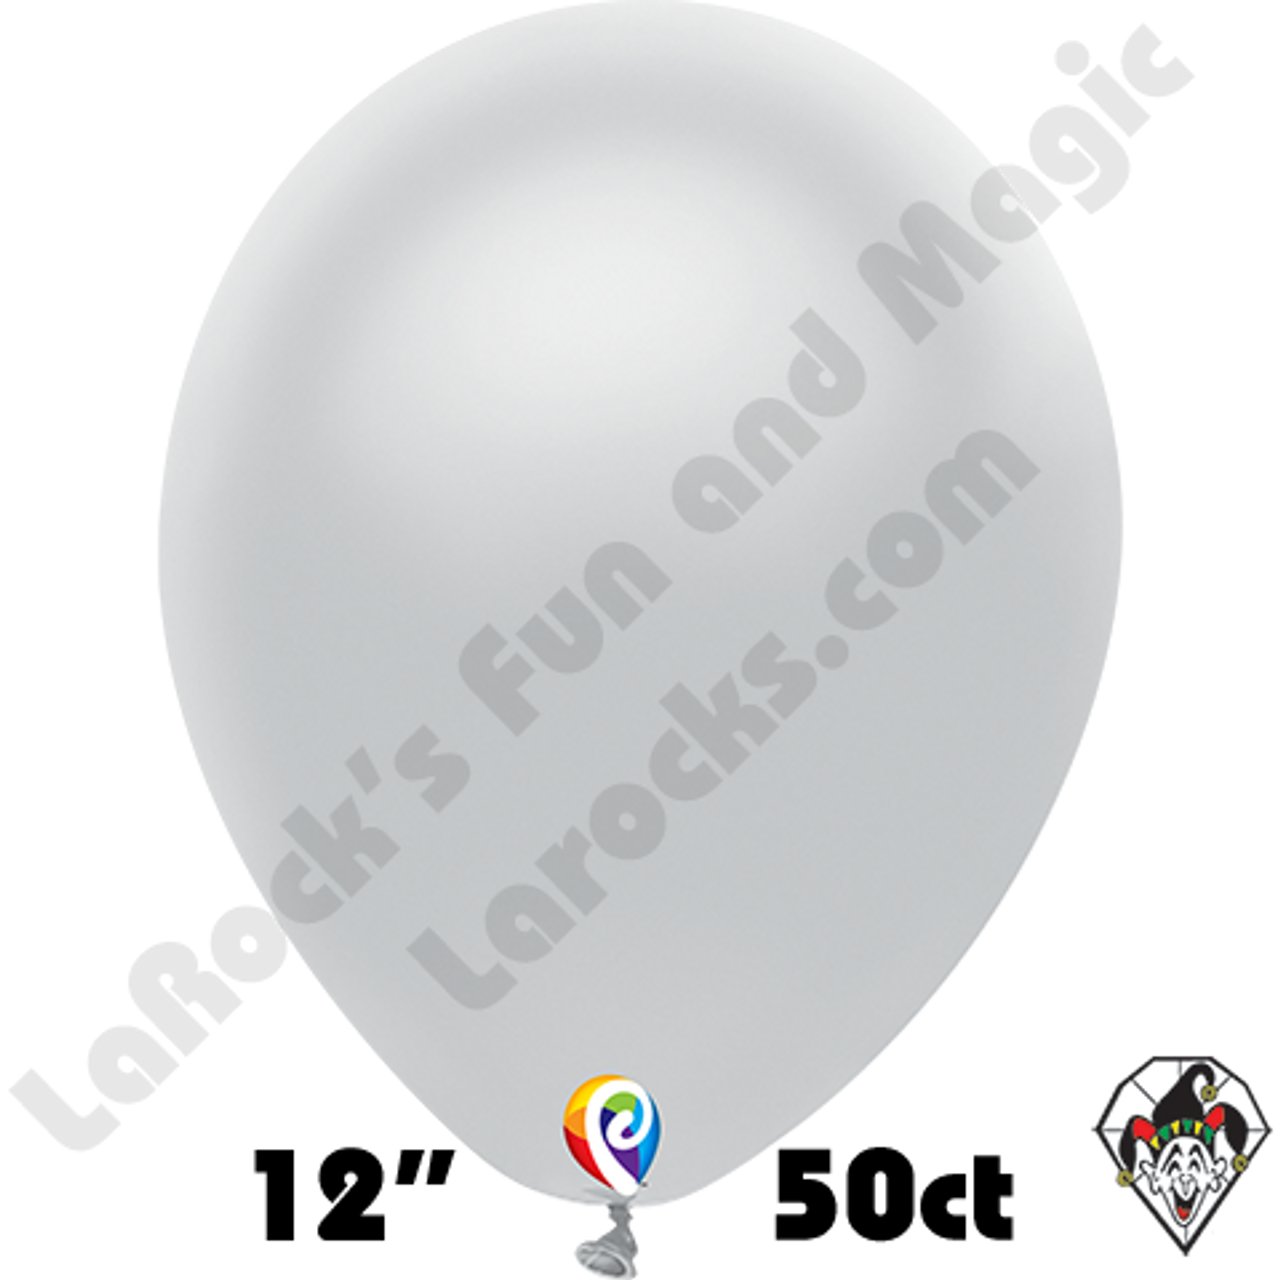 72) Clear Transparent Latex 12 Inch Balloons and White Curling